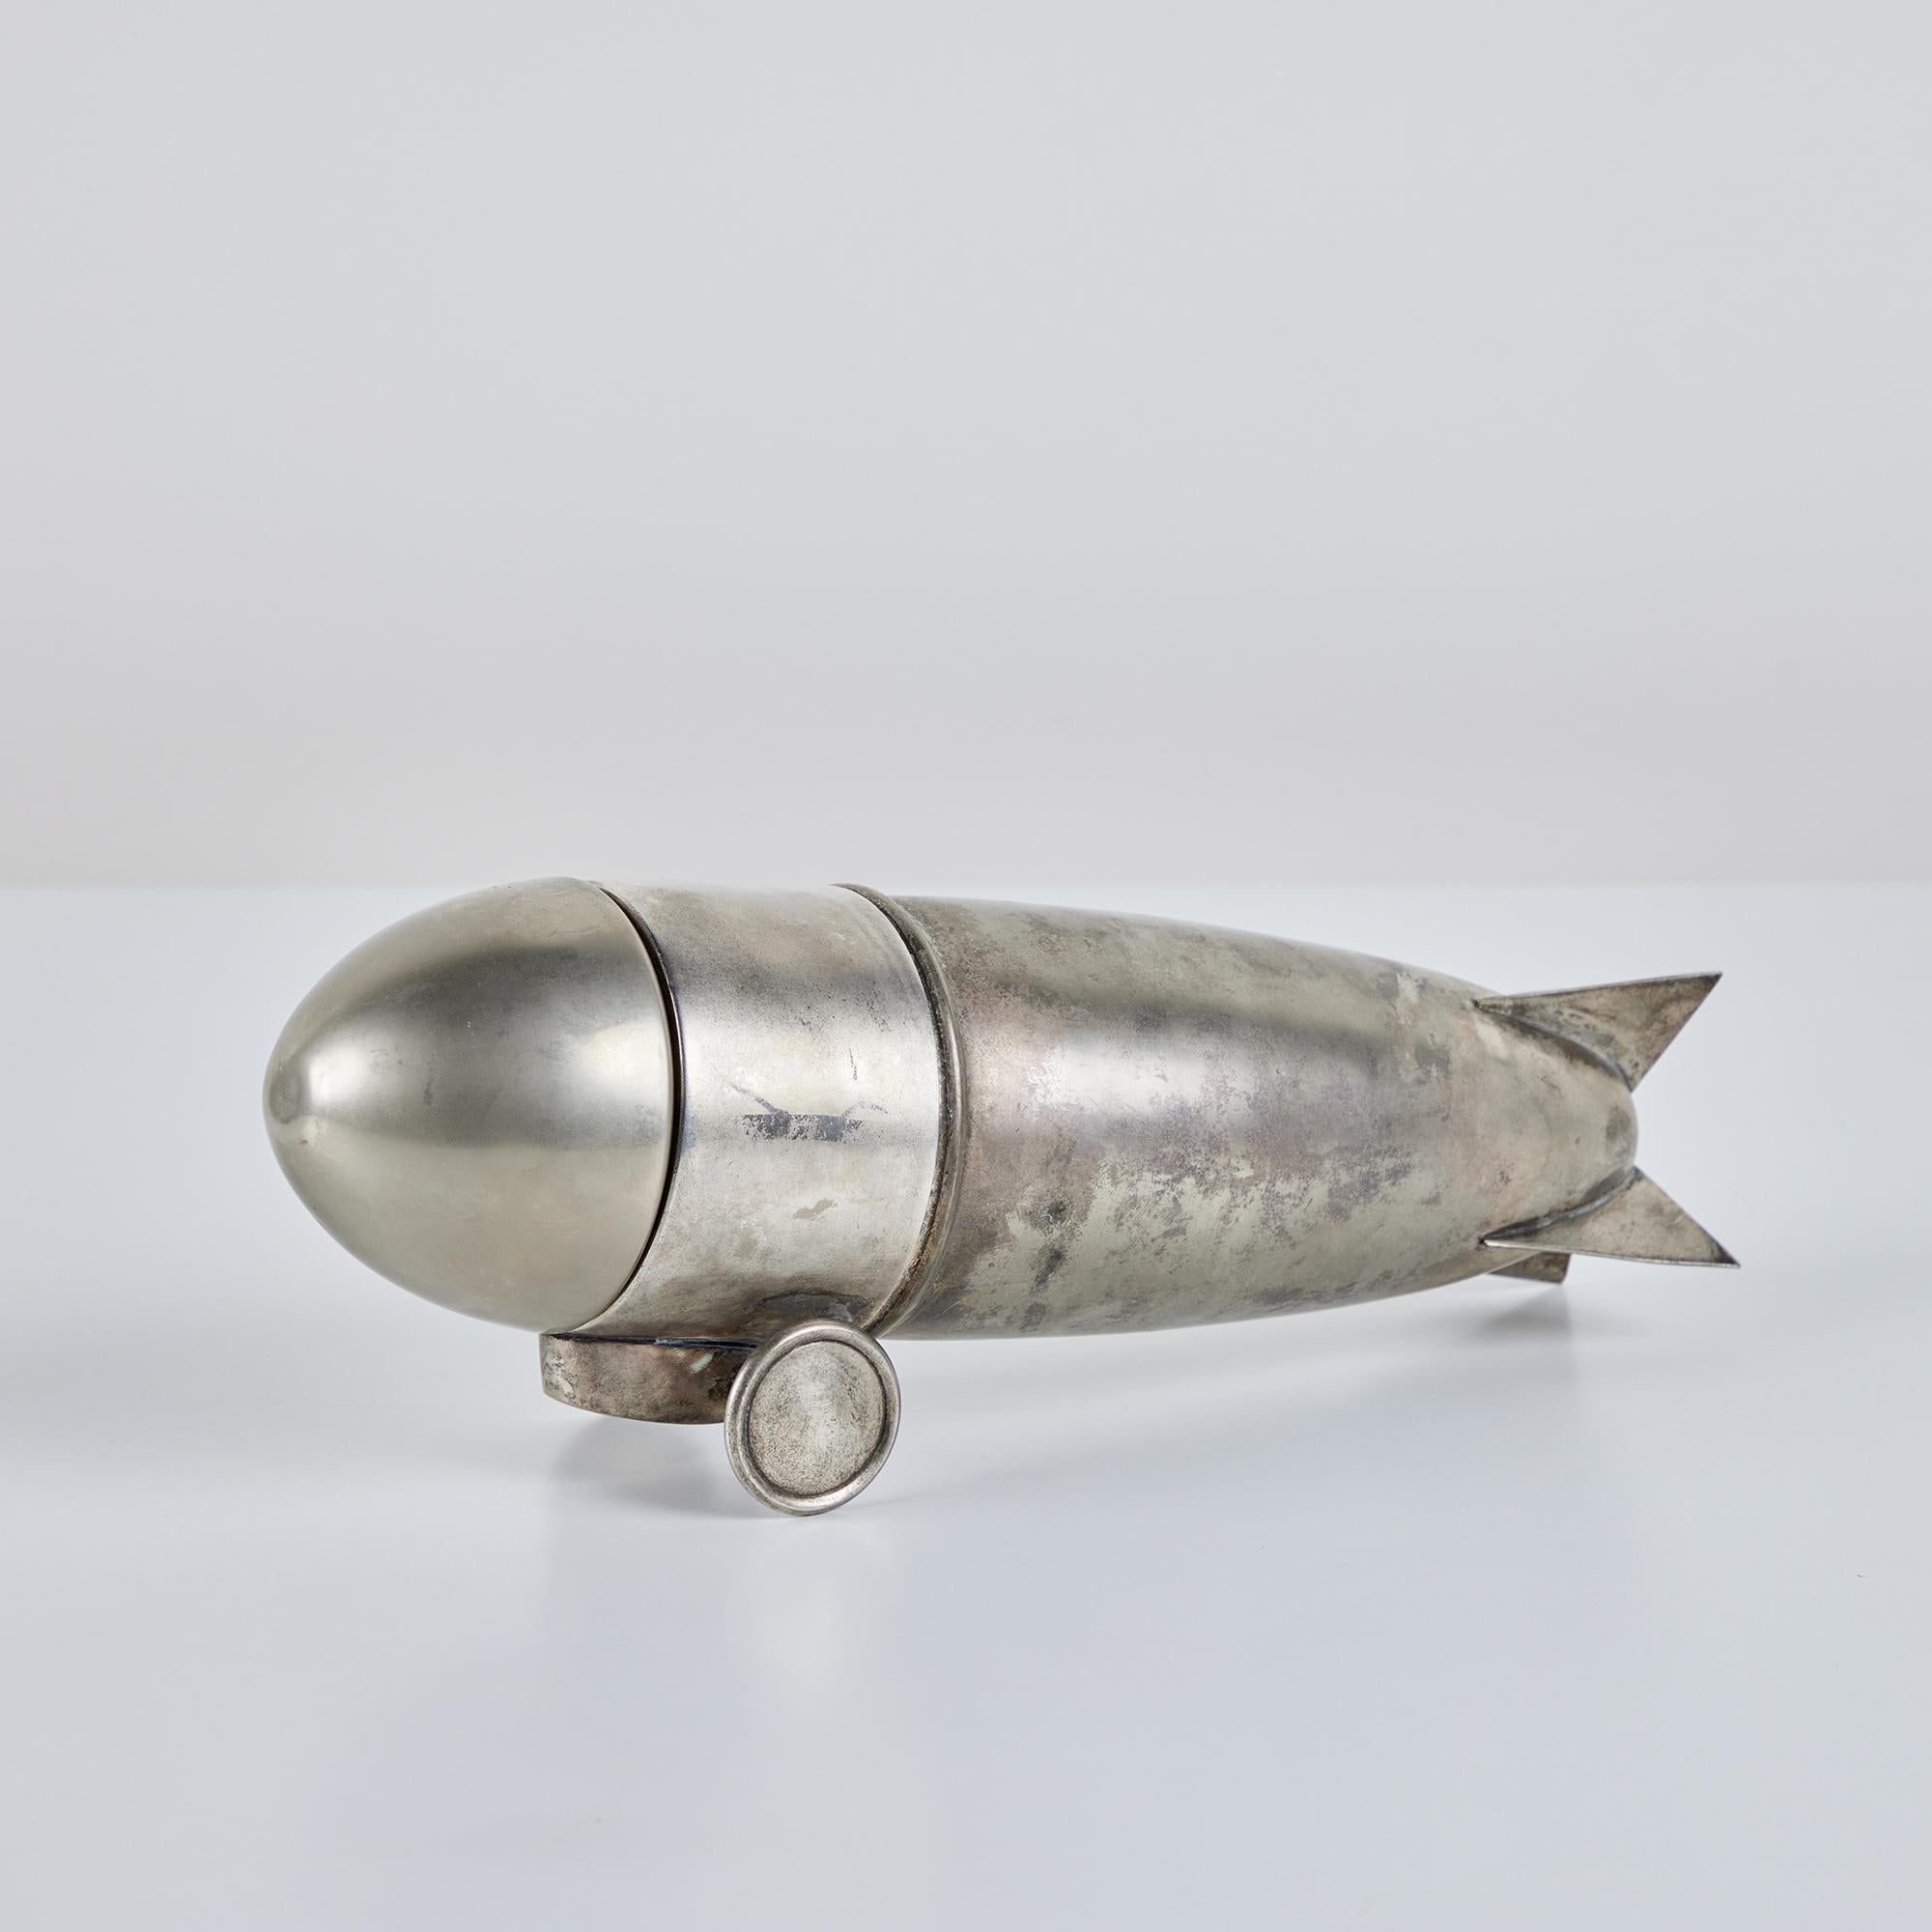 Art Deco silver plated cocktail shaker, circa 1930s, USA, in the style of Tiffany Studios. The shaker features a zeppelin body with three sections; a removable lid, strainer and vessel.

Dimensions
12